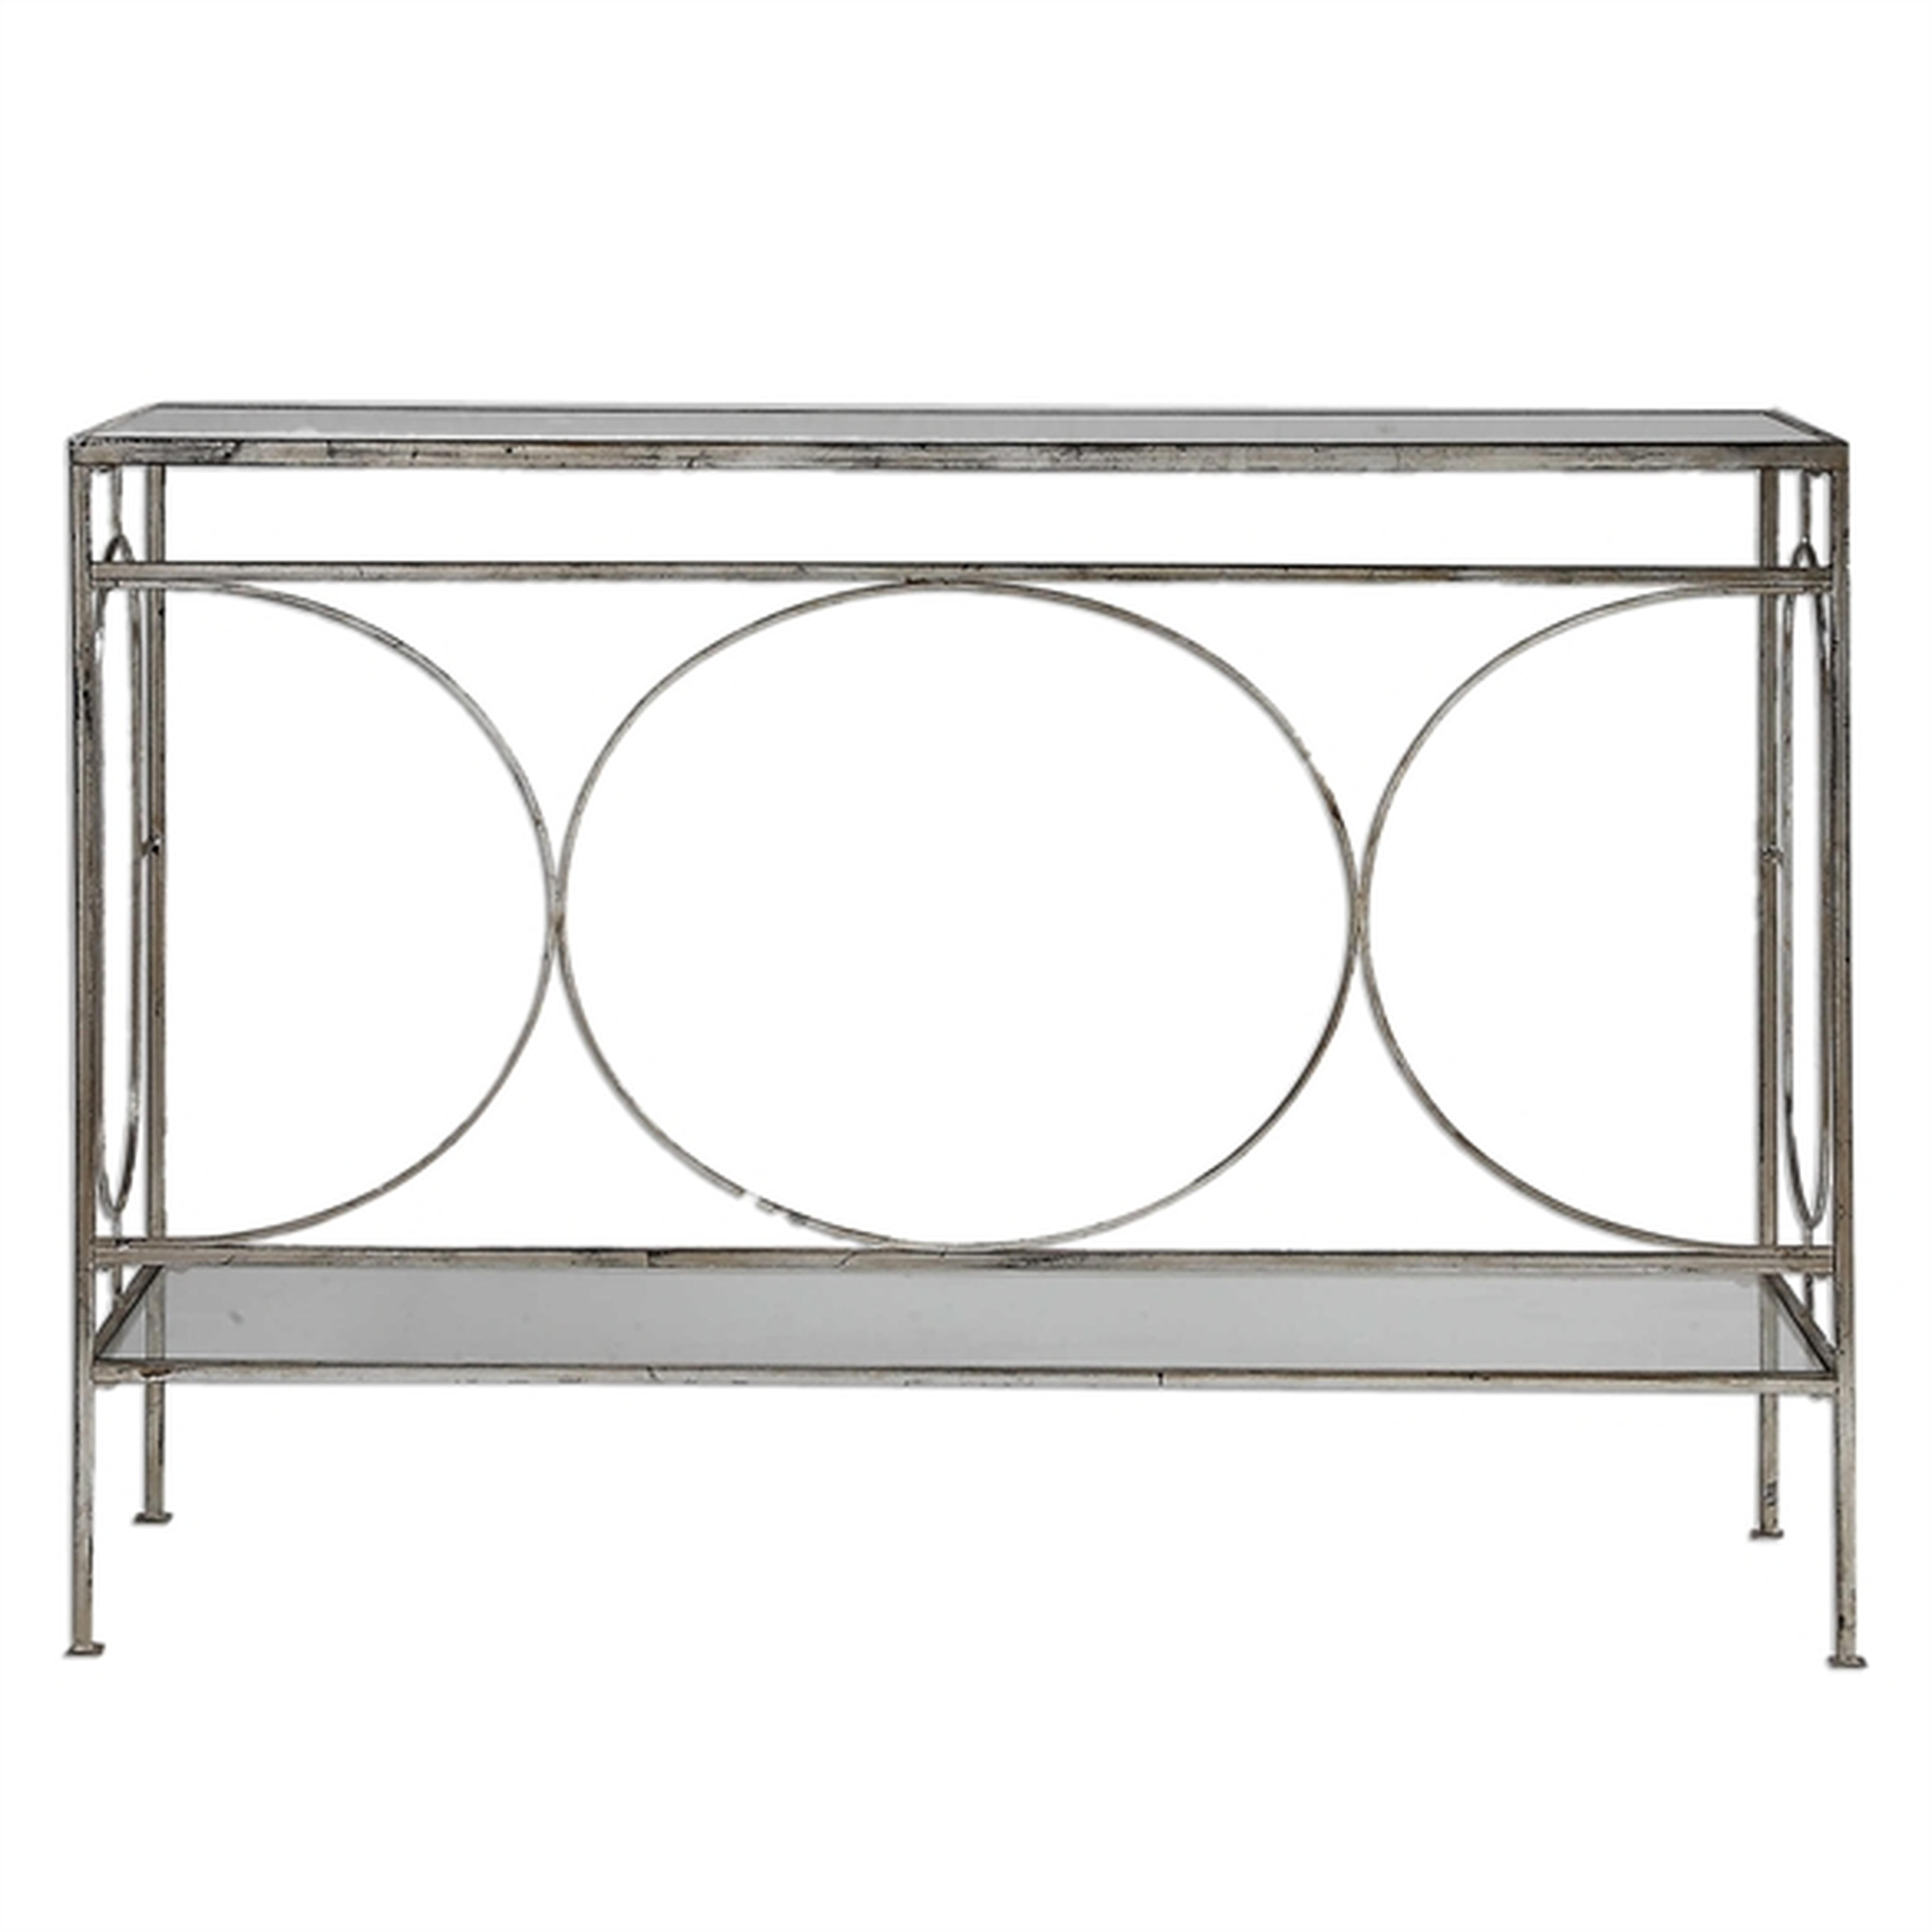 Luano Console Table - Hudsonhill Foundry